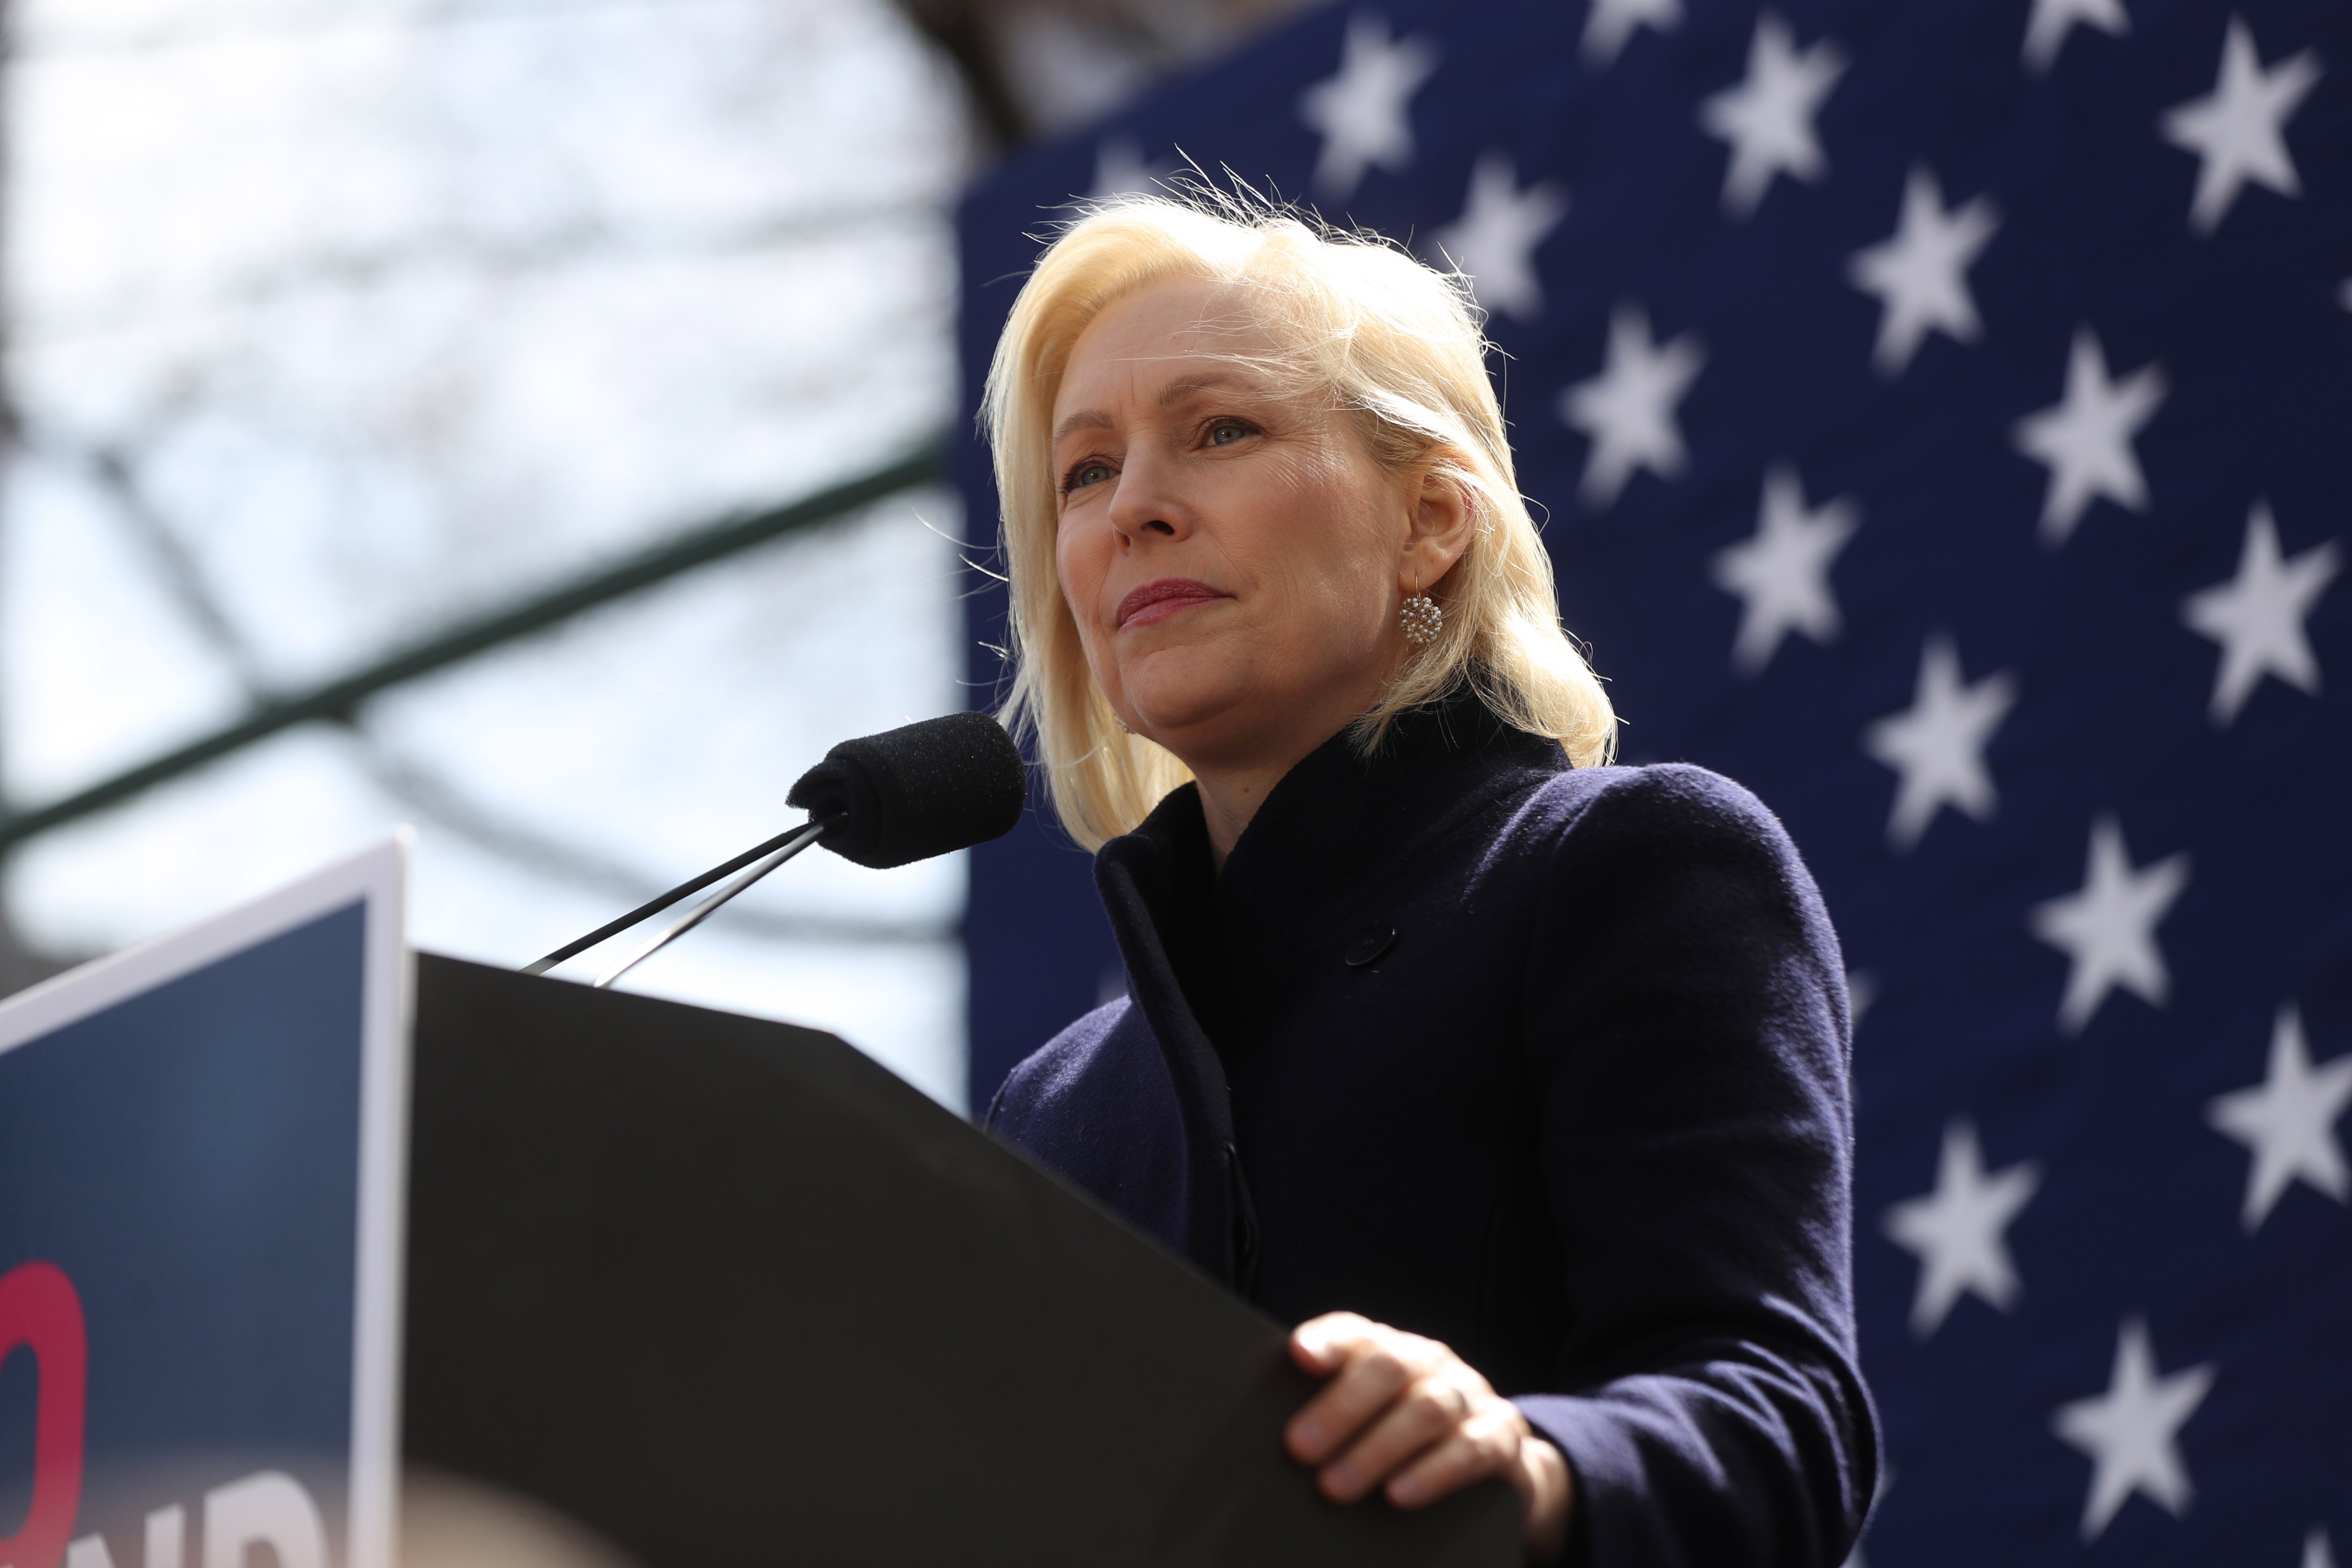 Democratic presidential candidate Sen. Kirsten Gillibrand speaks during a rally in front of Trump International Hotel in New York, United States on March 22, 2019. (Anadolu Agency—Getty Images)